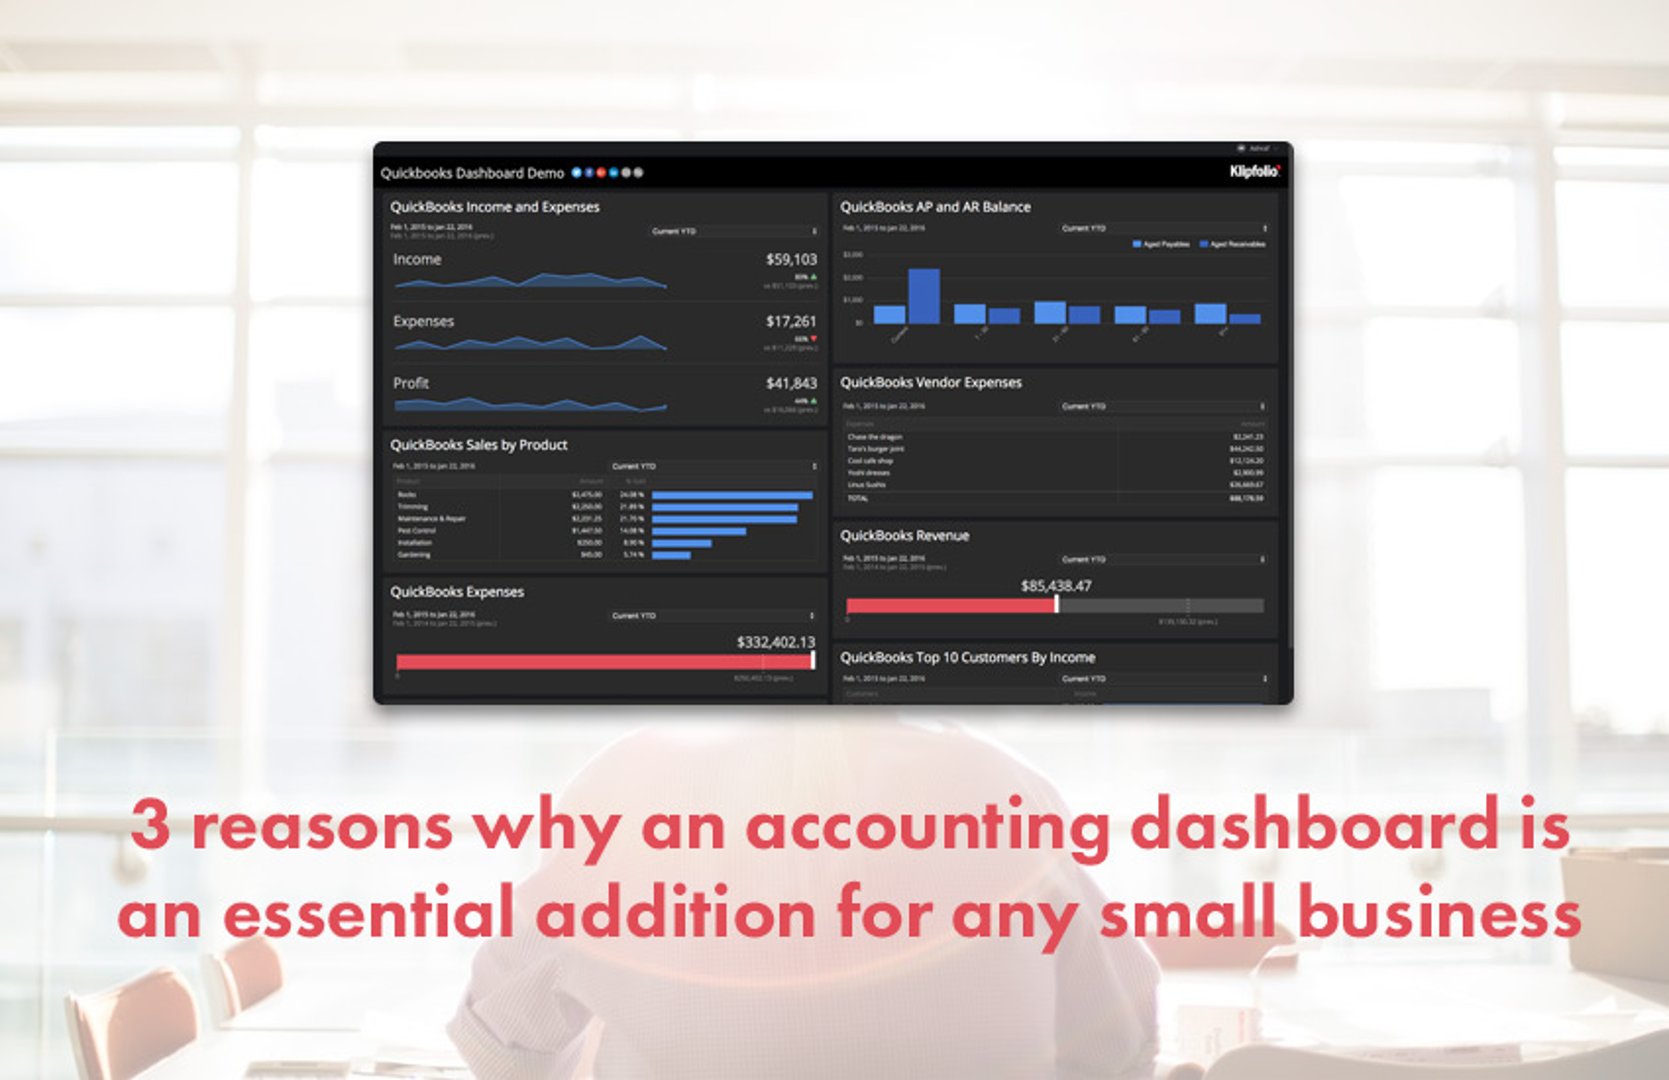 3 Reasons for An Accounting Dashboard